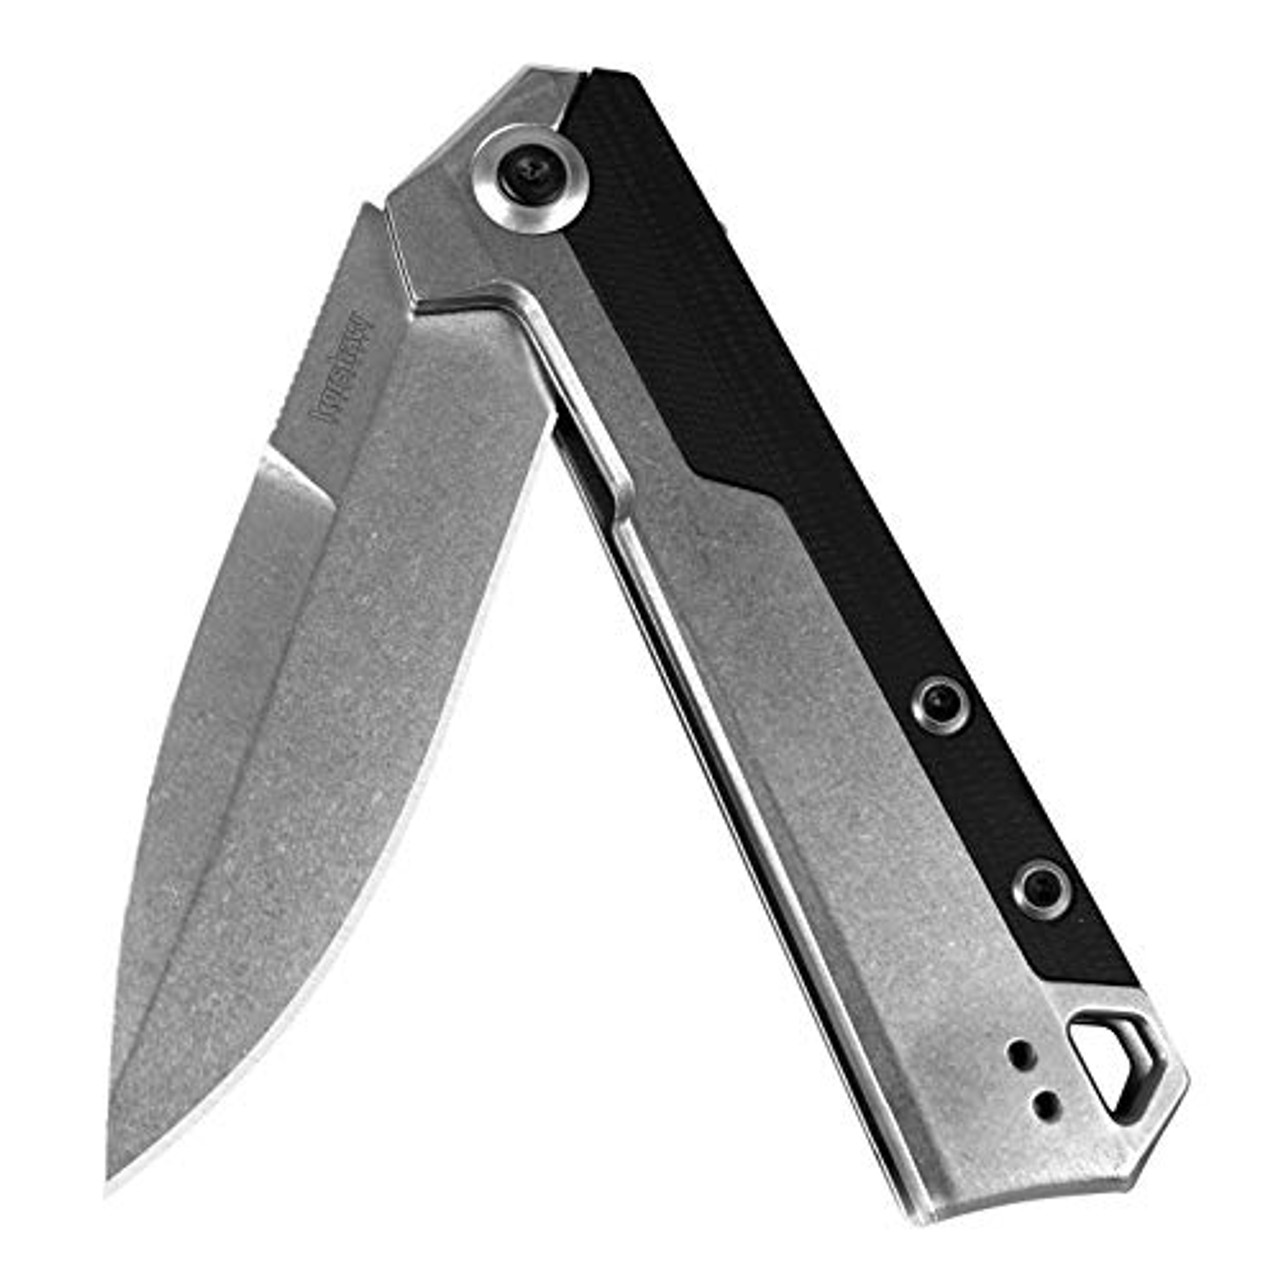 Kershaw 3 piece Assisted Open Folding Knife Set with spork and pry bar –  Atlantic Knife Company